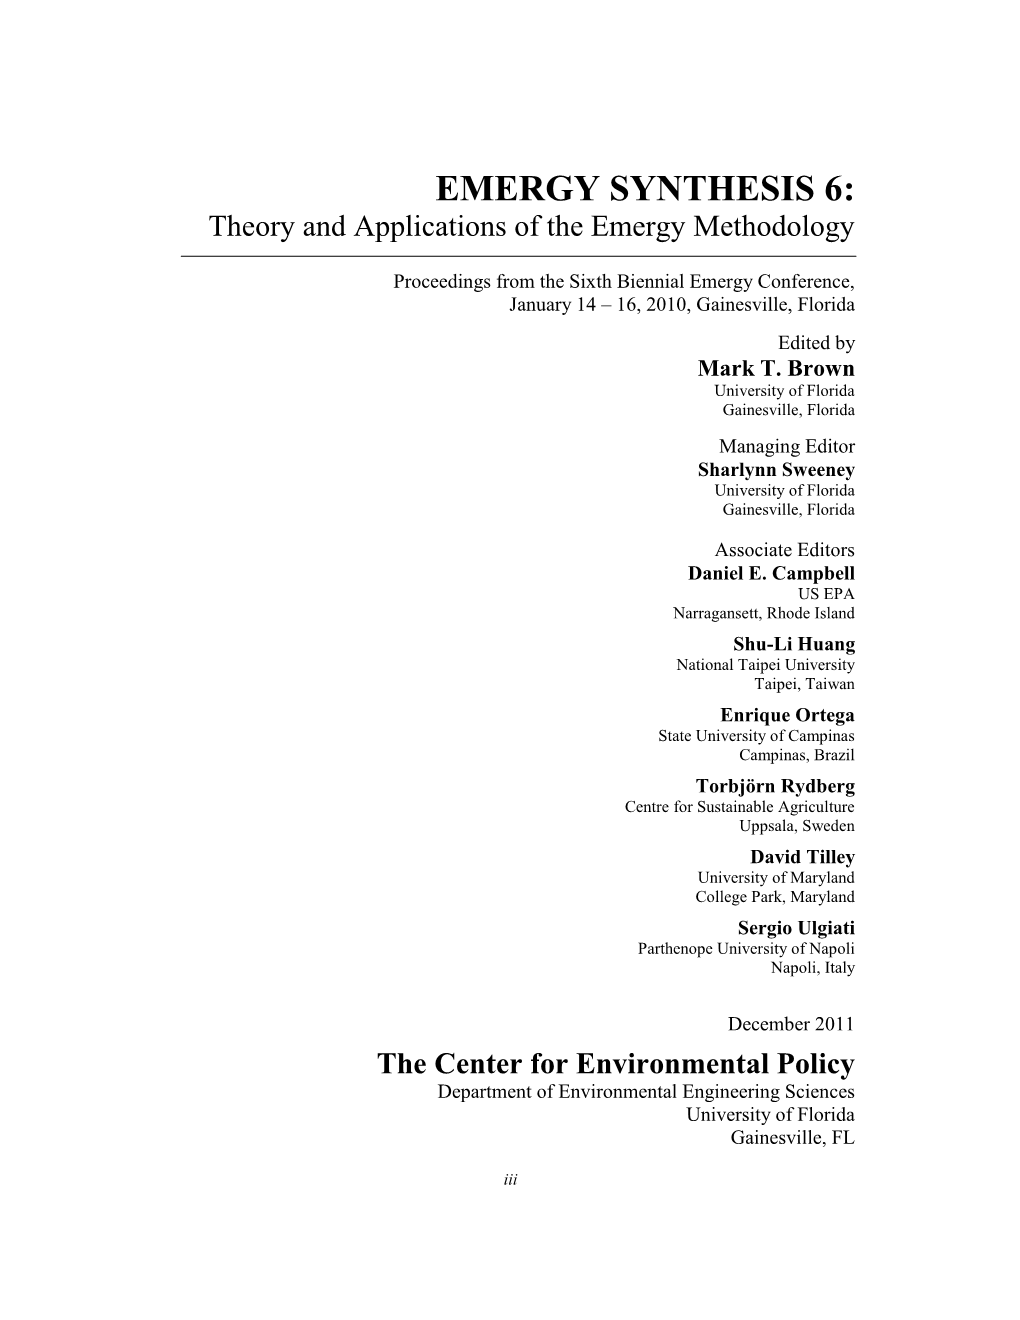 EMERGY SYNTHESIS 6: Theory and Applications of the Emergy Methodology